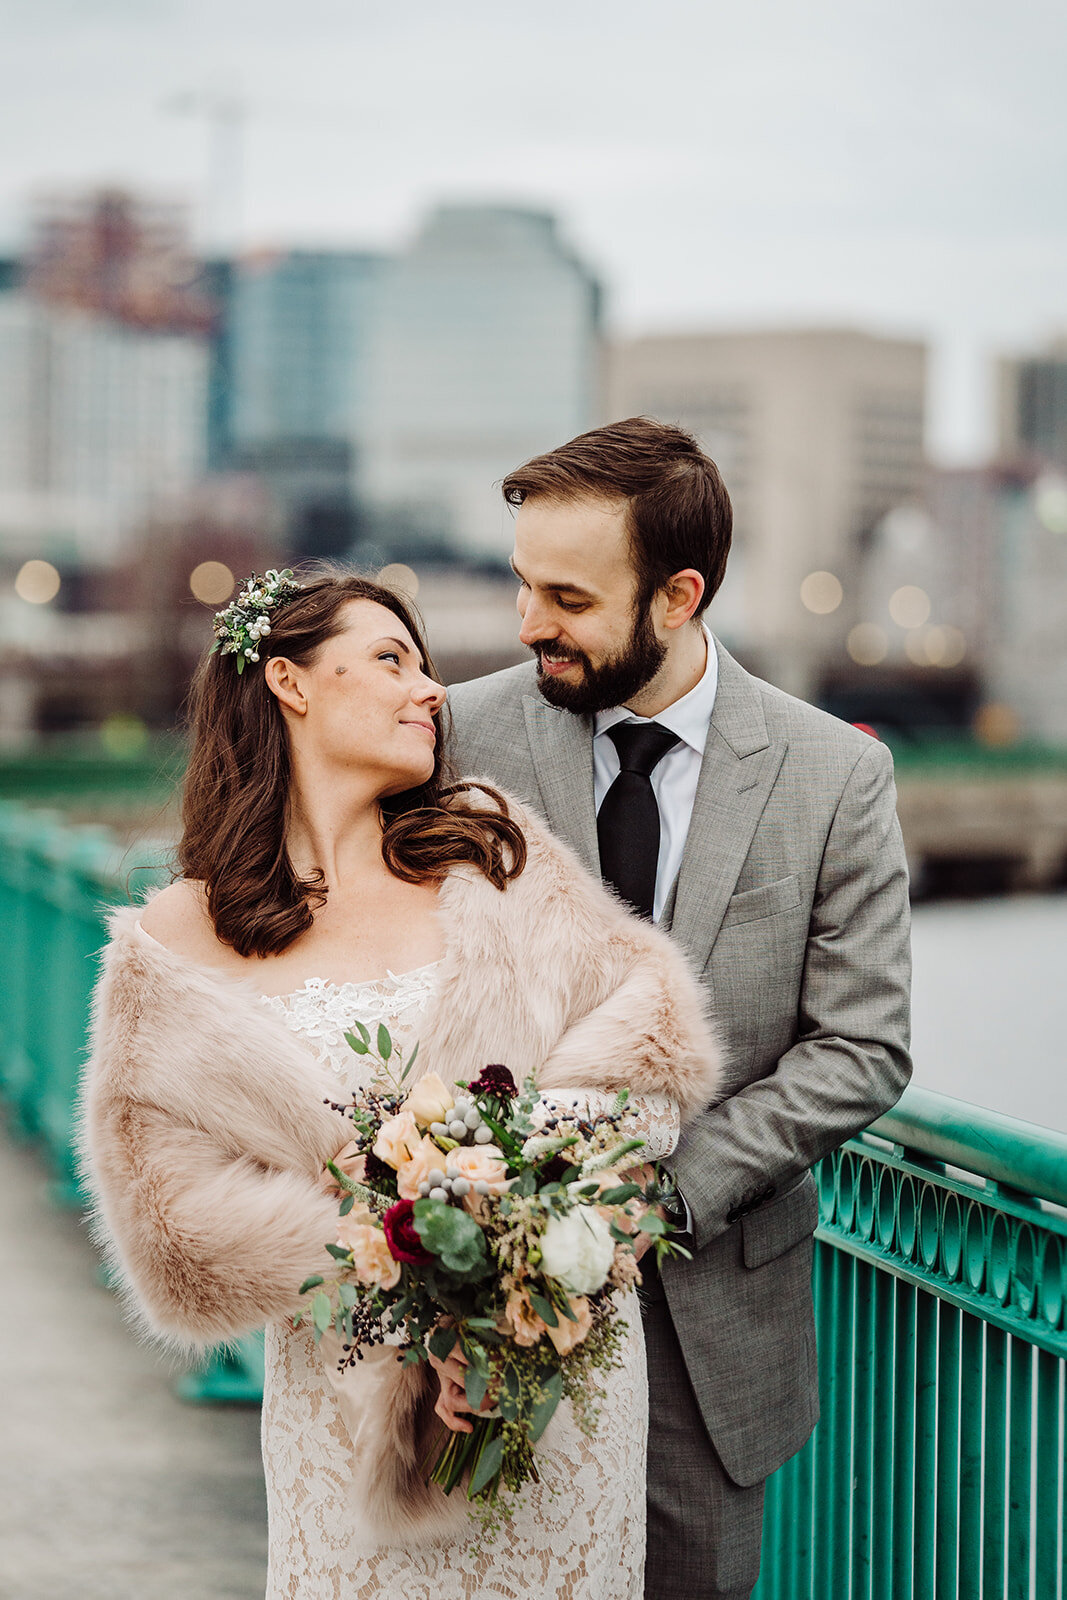 wedding couple dressed for winter pose by green fence in boston